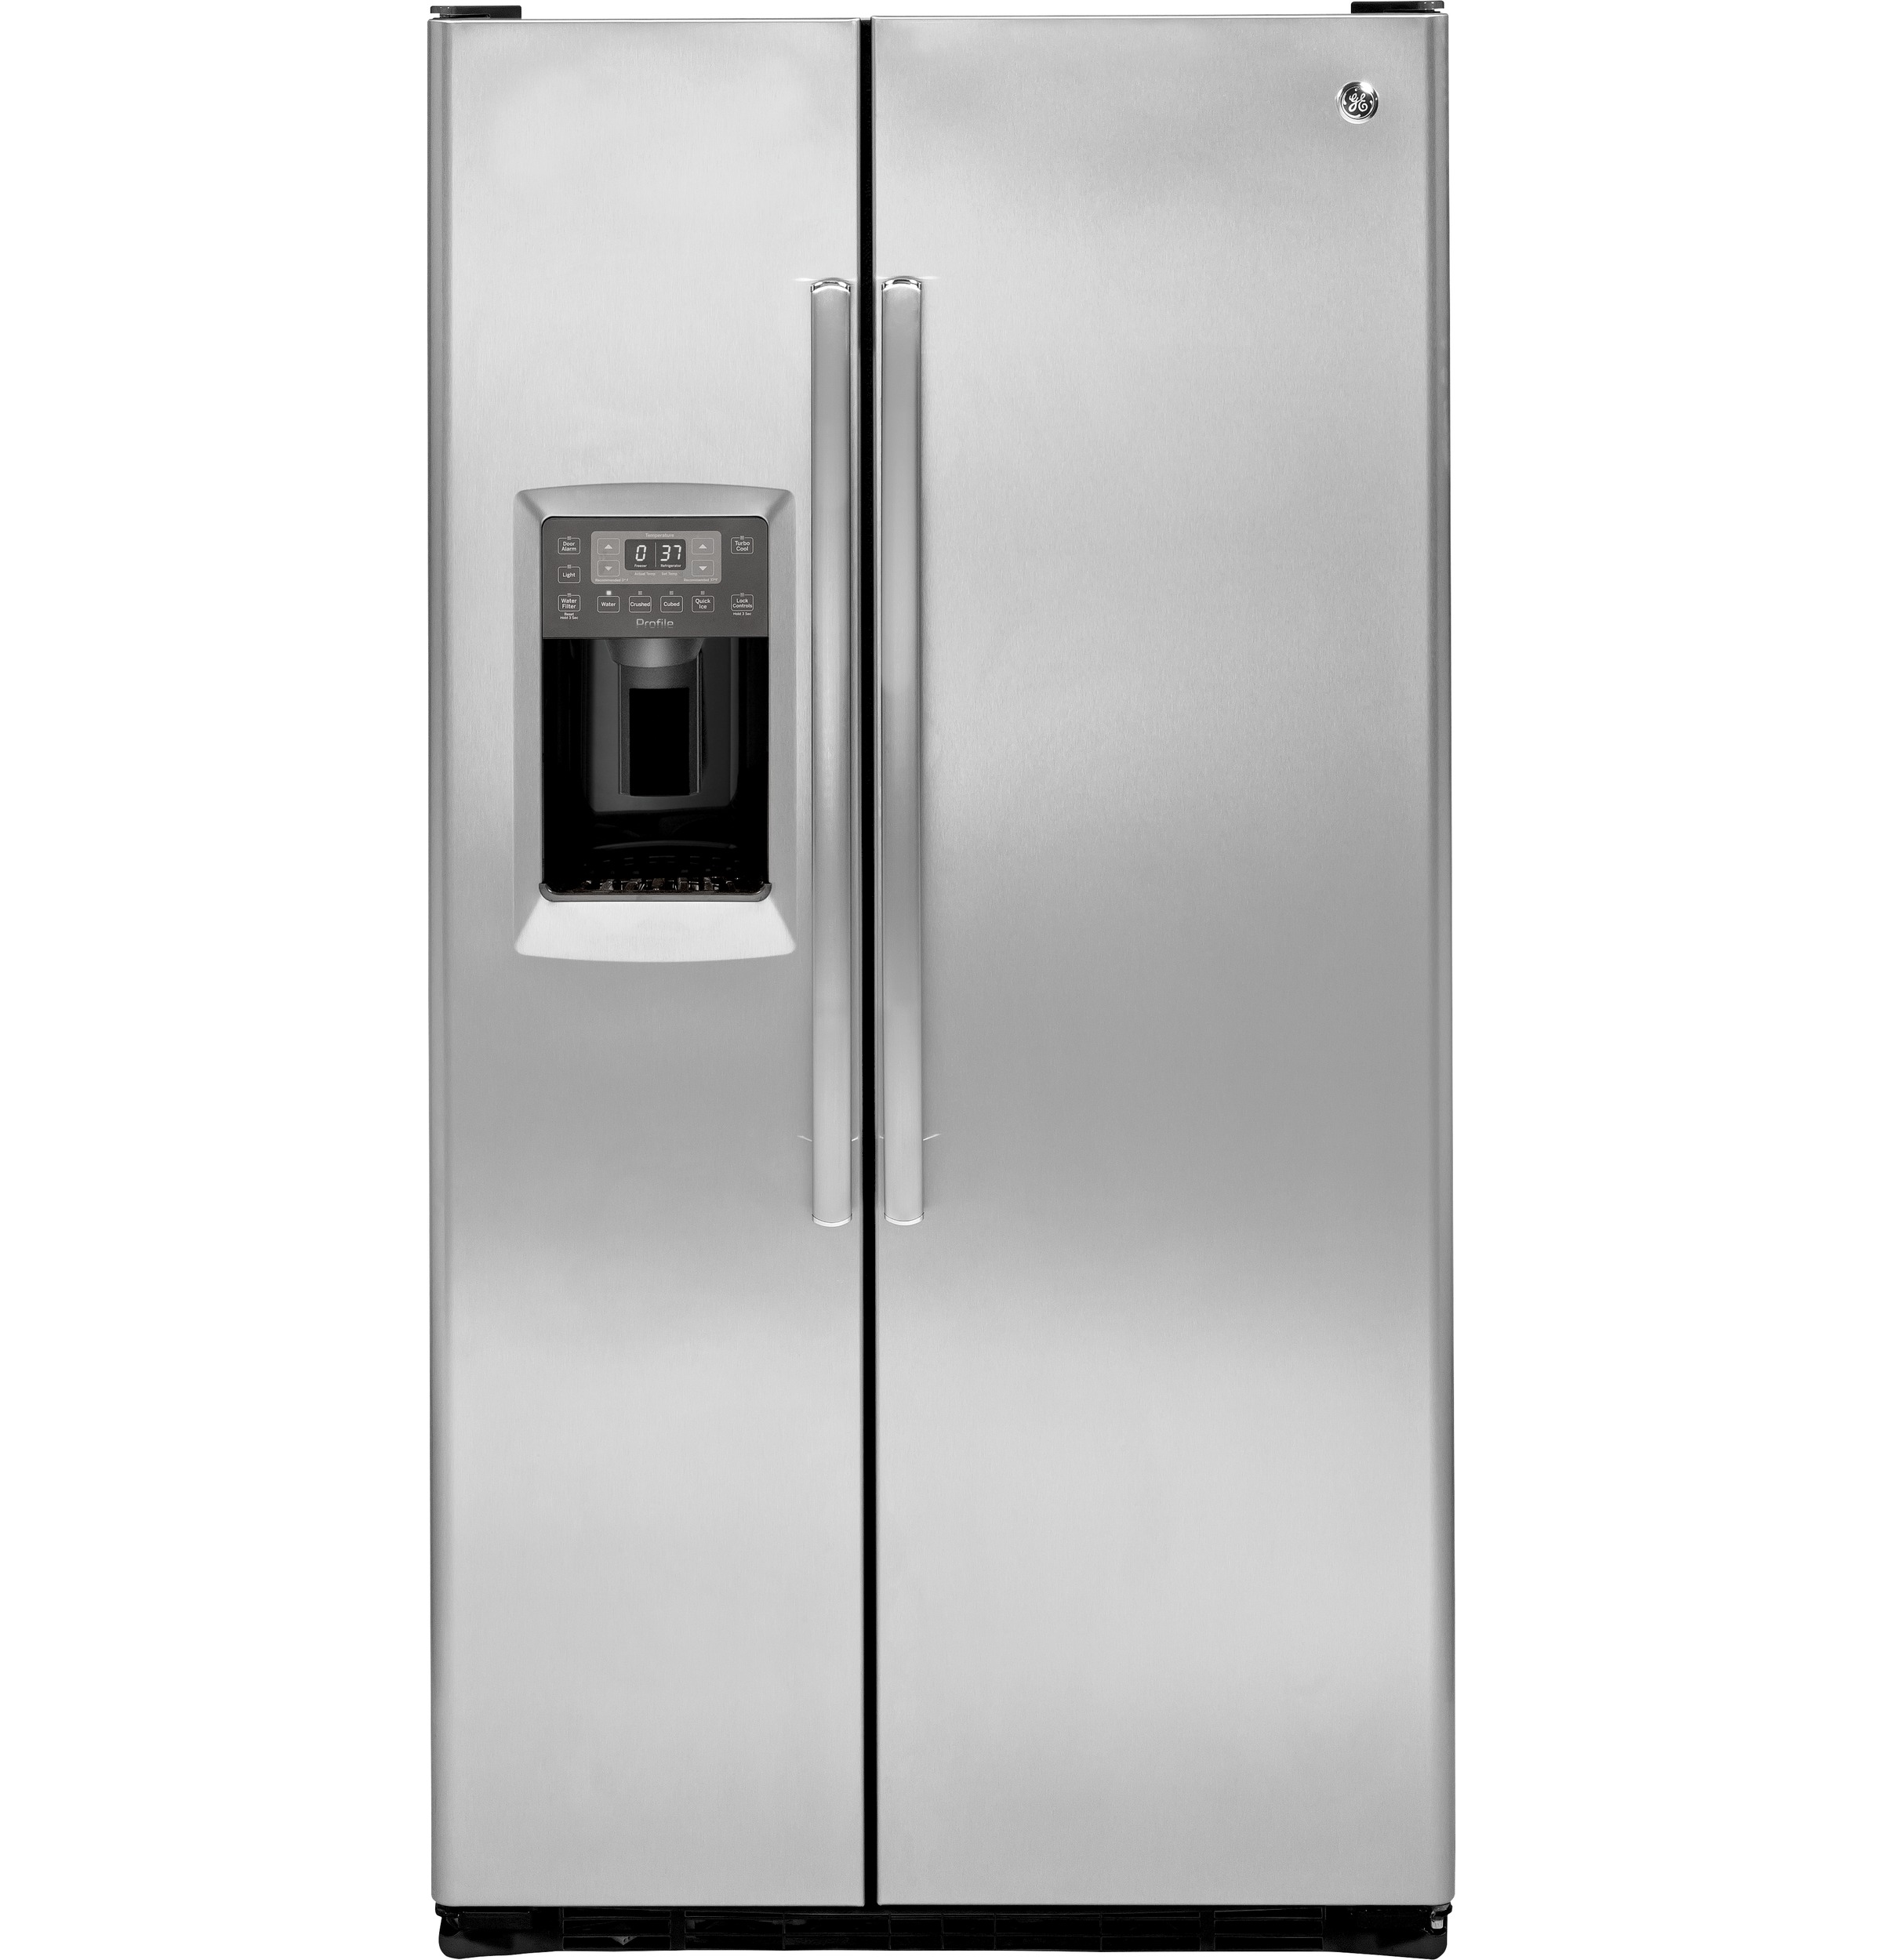 GE Profile™ Series 23.3 Cu. Ft. Counter-Depth Side-by-Side Refrigerator